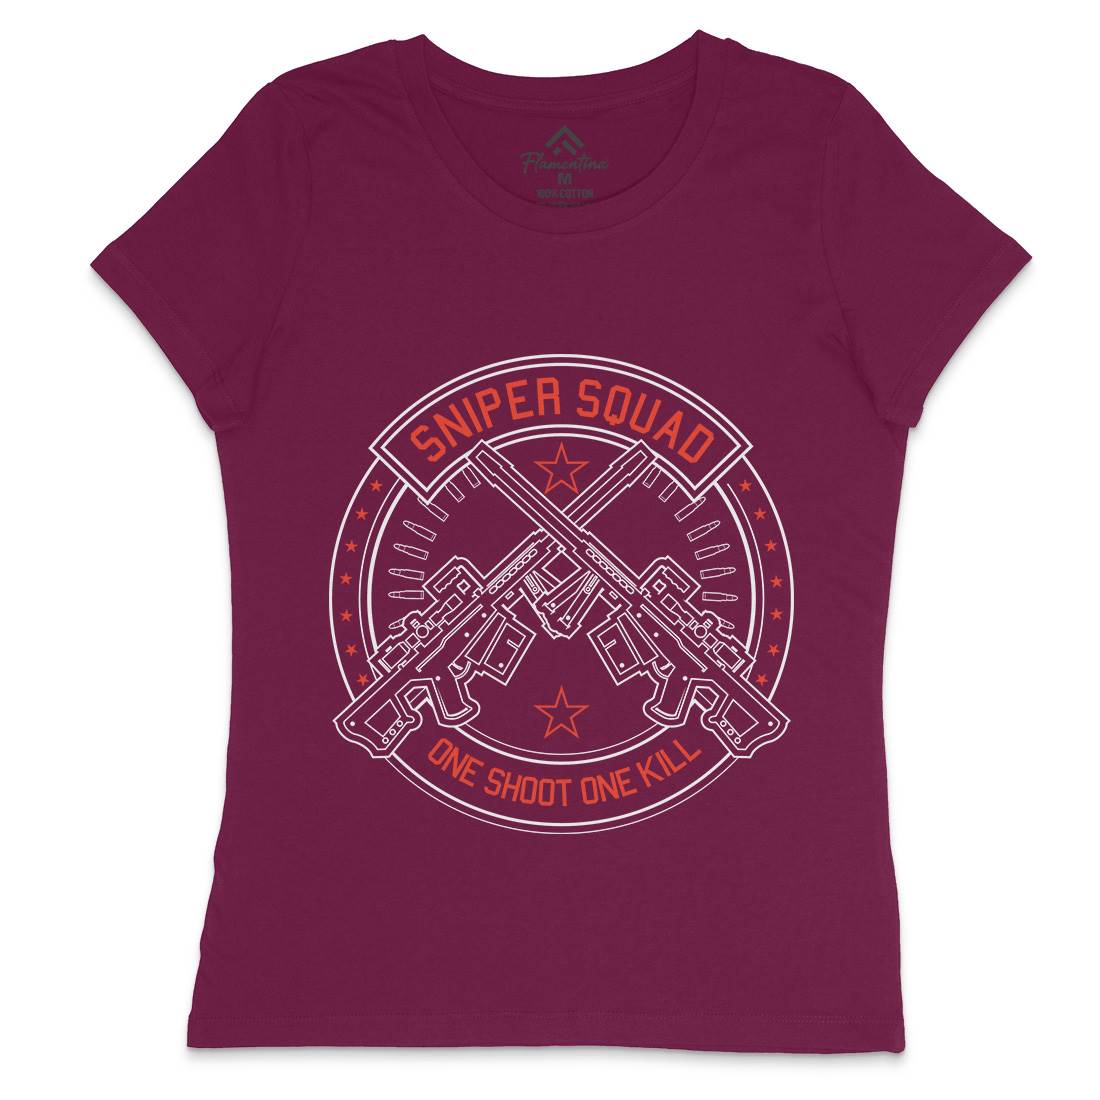 Sniper Squad Womens Crew Neck T-Shirt Army A279